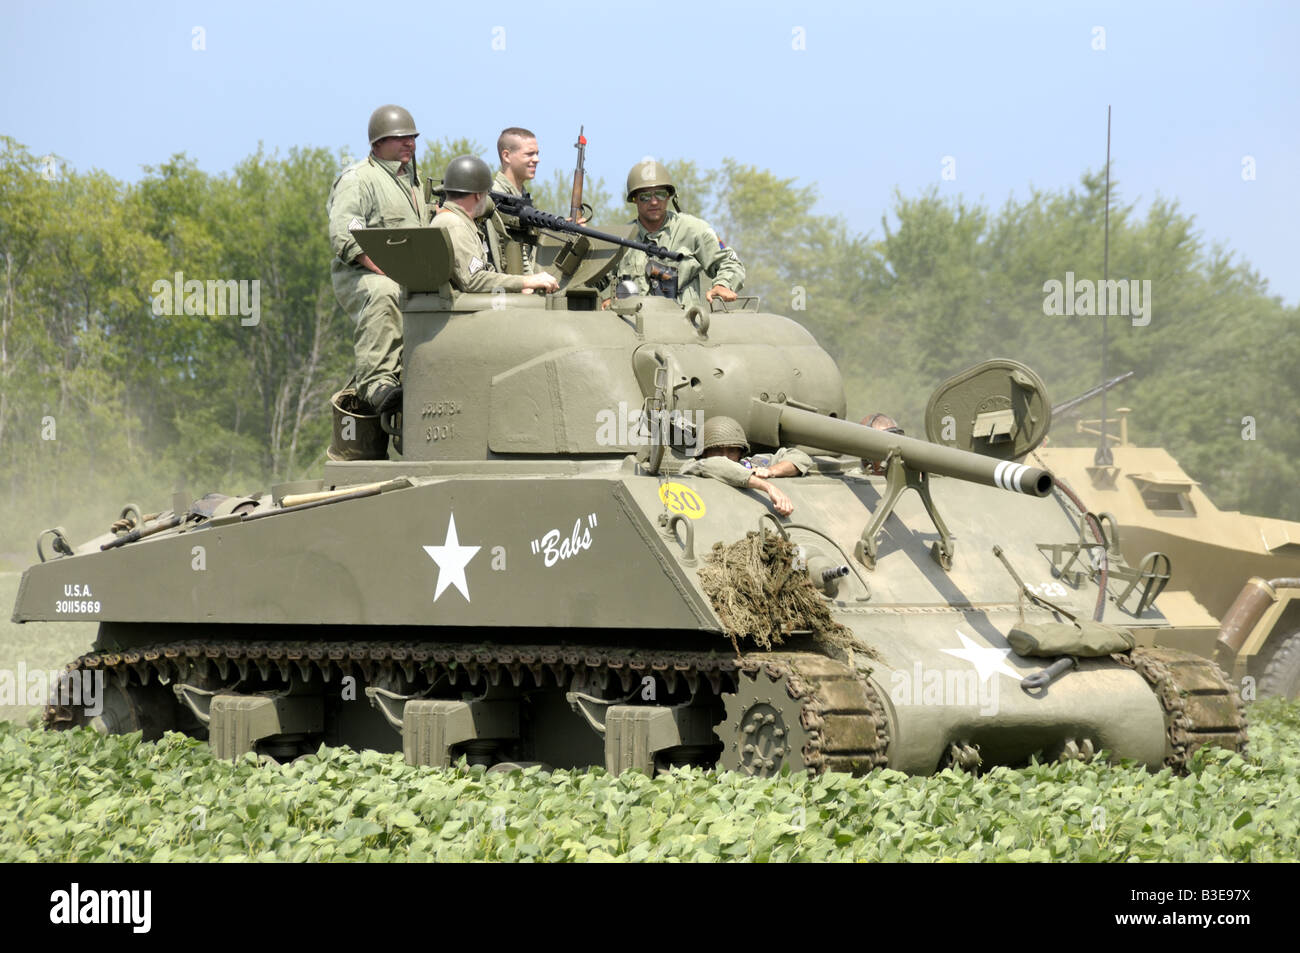 American soldiers aboard an American tank during a WWII reenactment in Bellville, Michigan Stock Photo